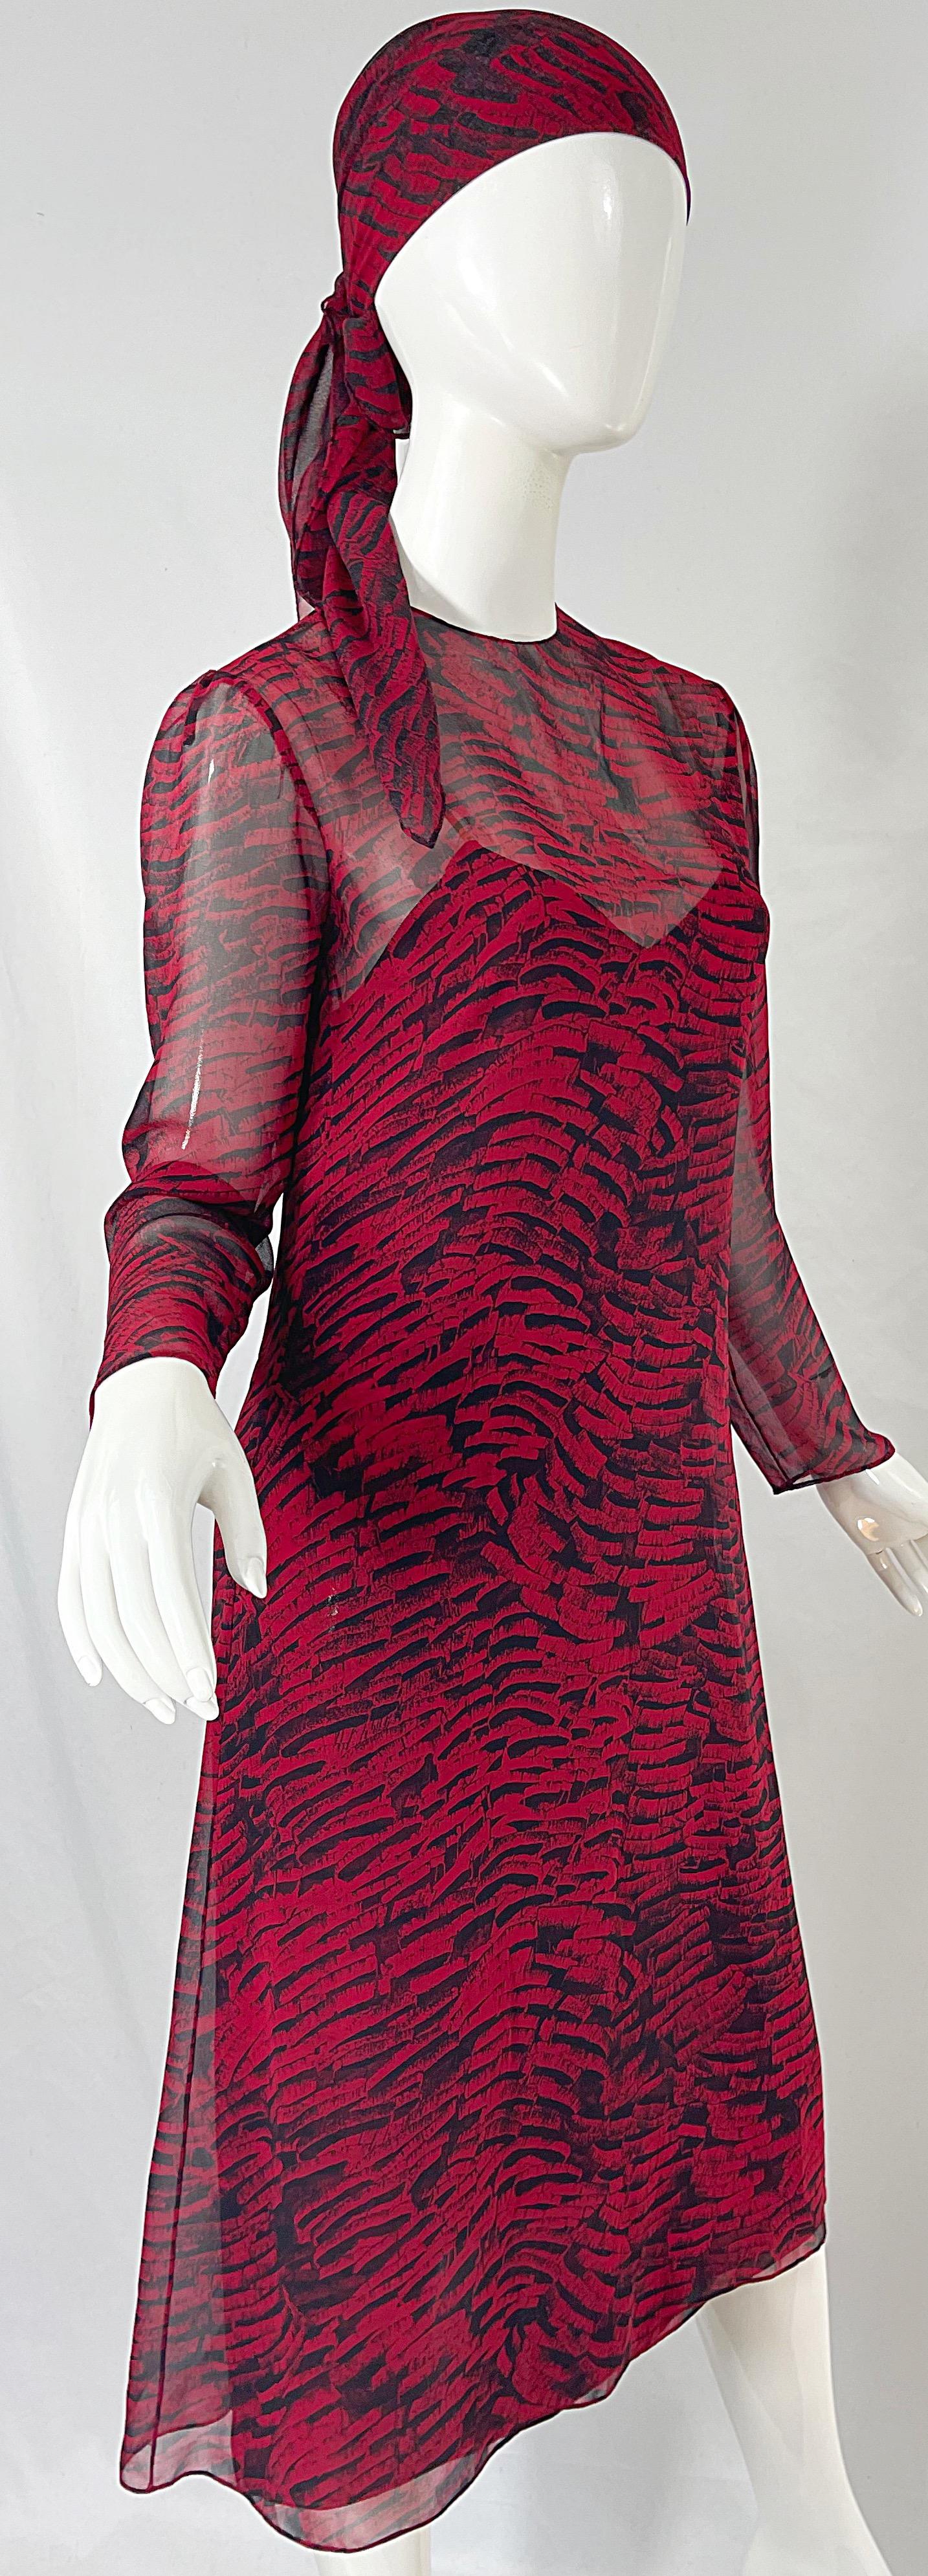 1970s Halston Red + Black Abstract Animal Print Three Piece 70s Dress Ensemble For Sale 10